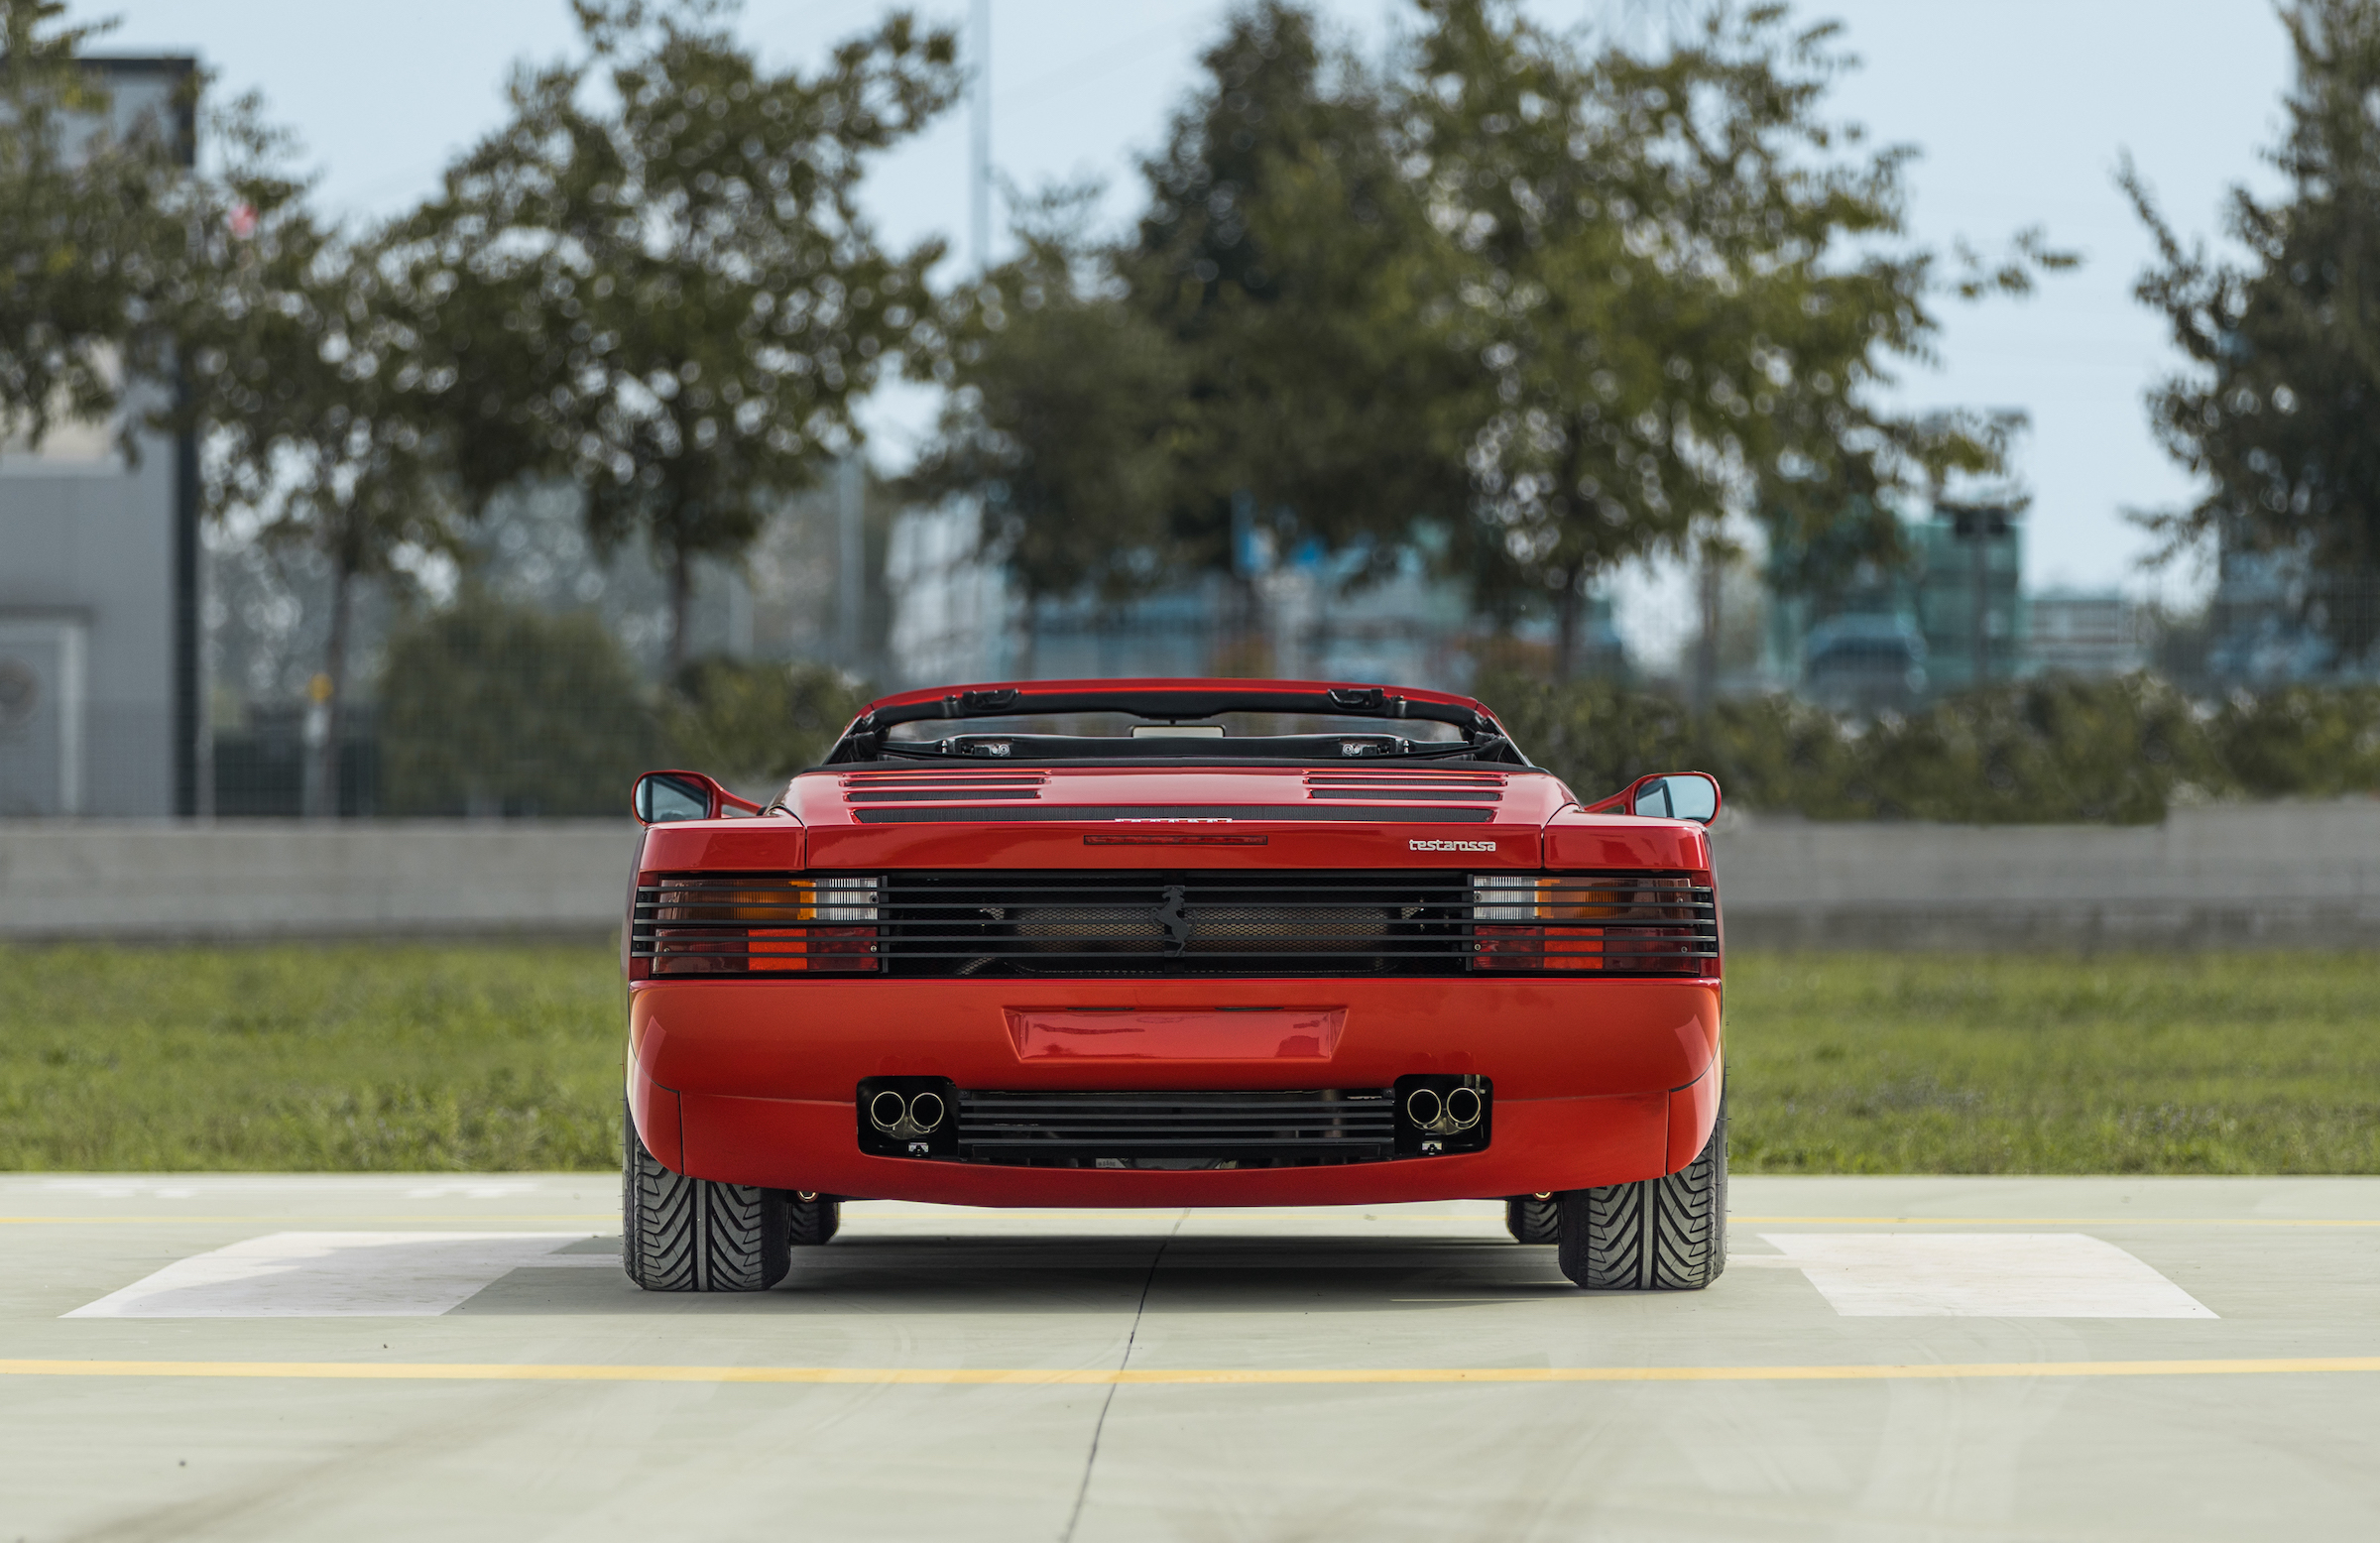 Feel the Passing Breeze with this Outrun-style Testarossa Spider